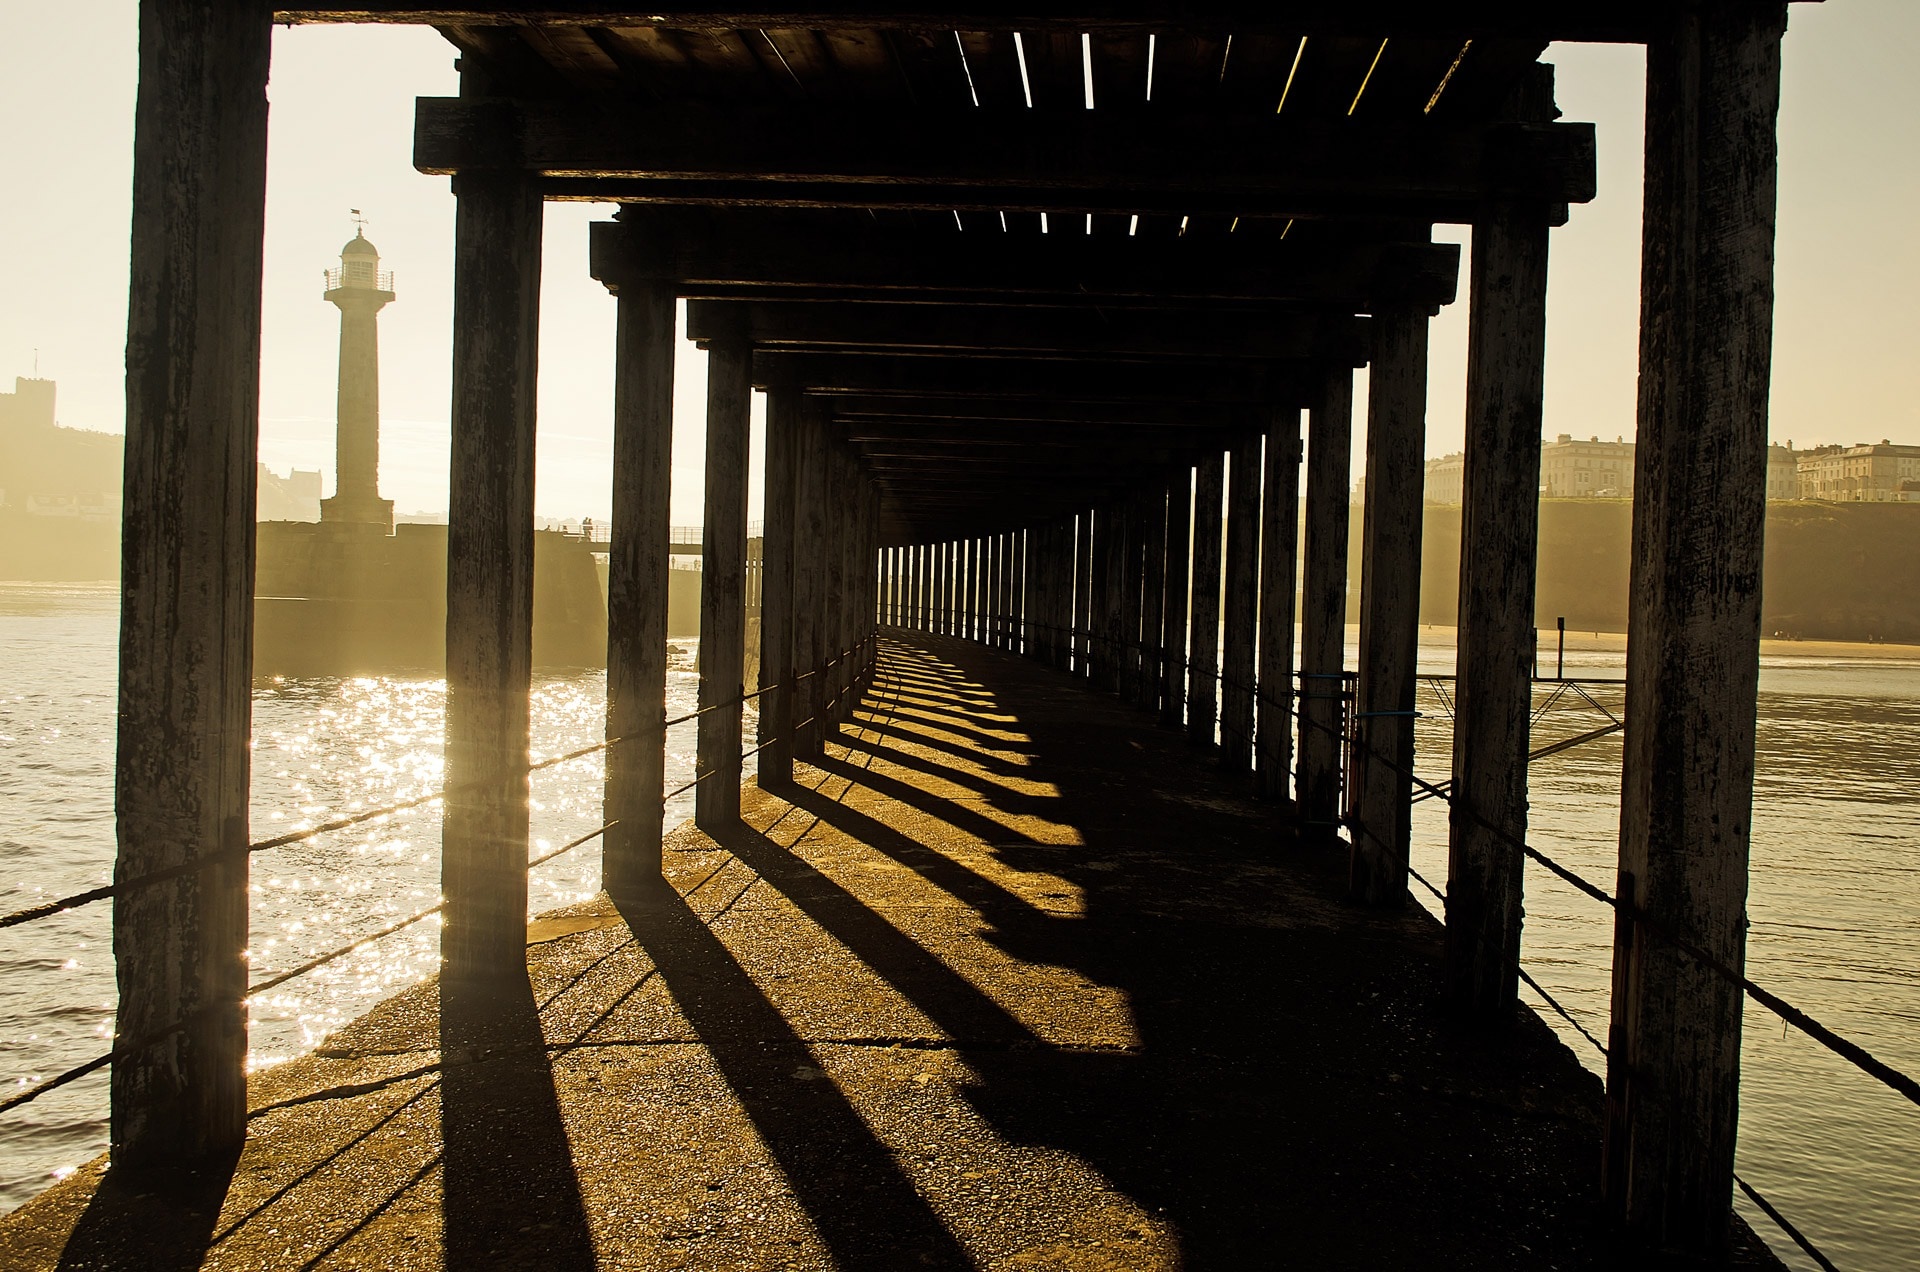 Pillars, Sea, Lighthouse, Wooden, Old, shadow, architecture